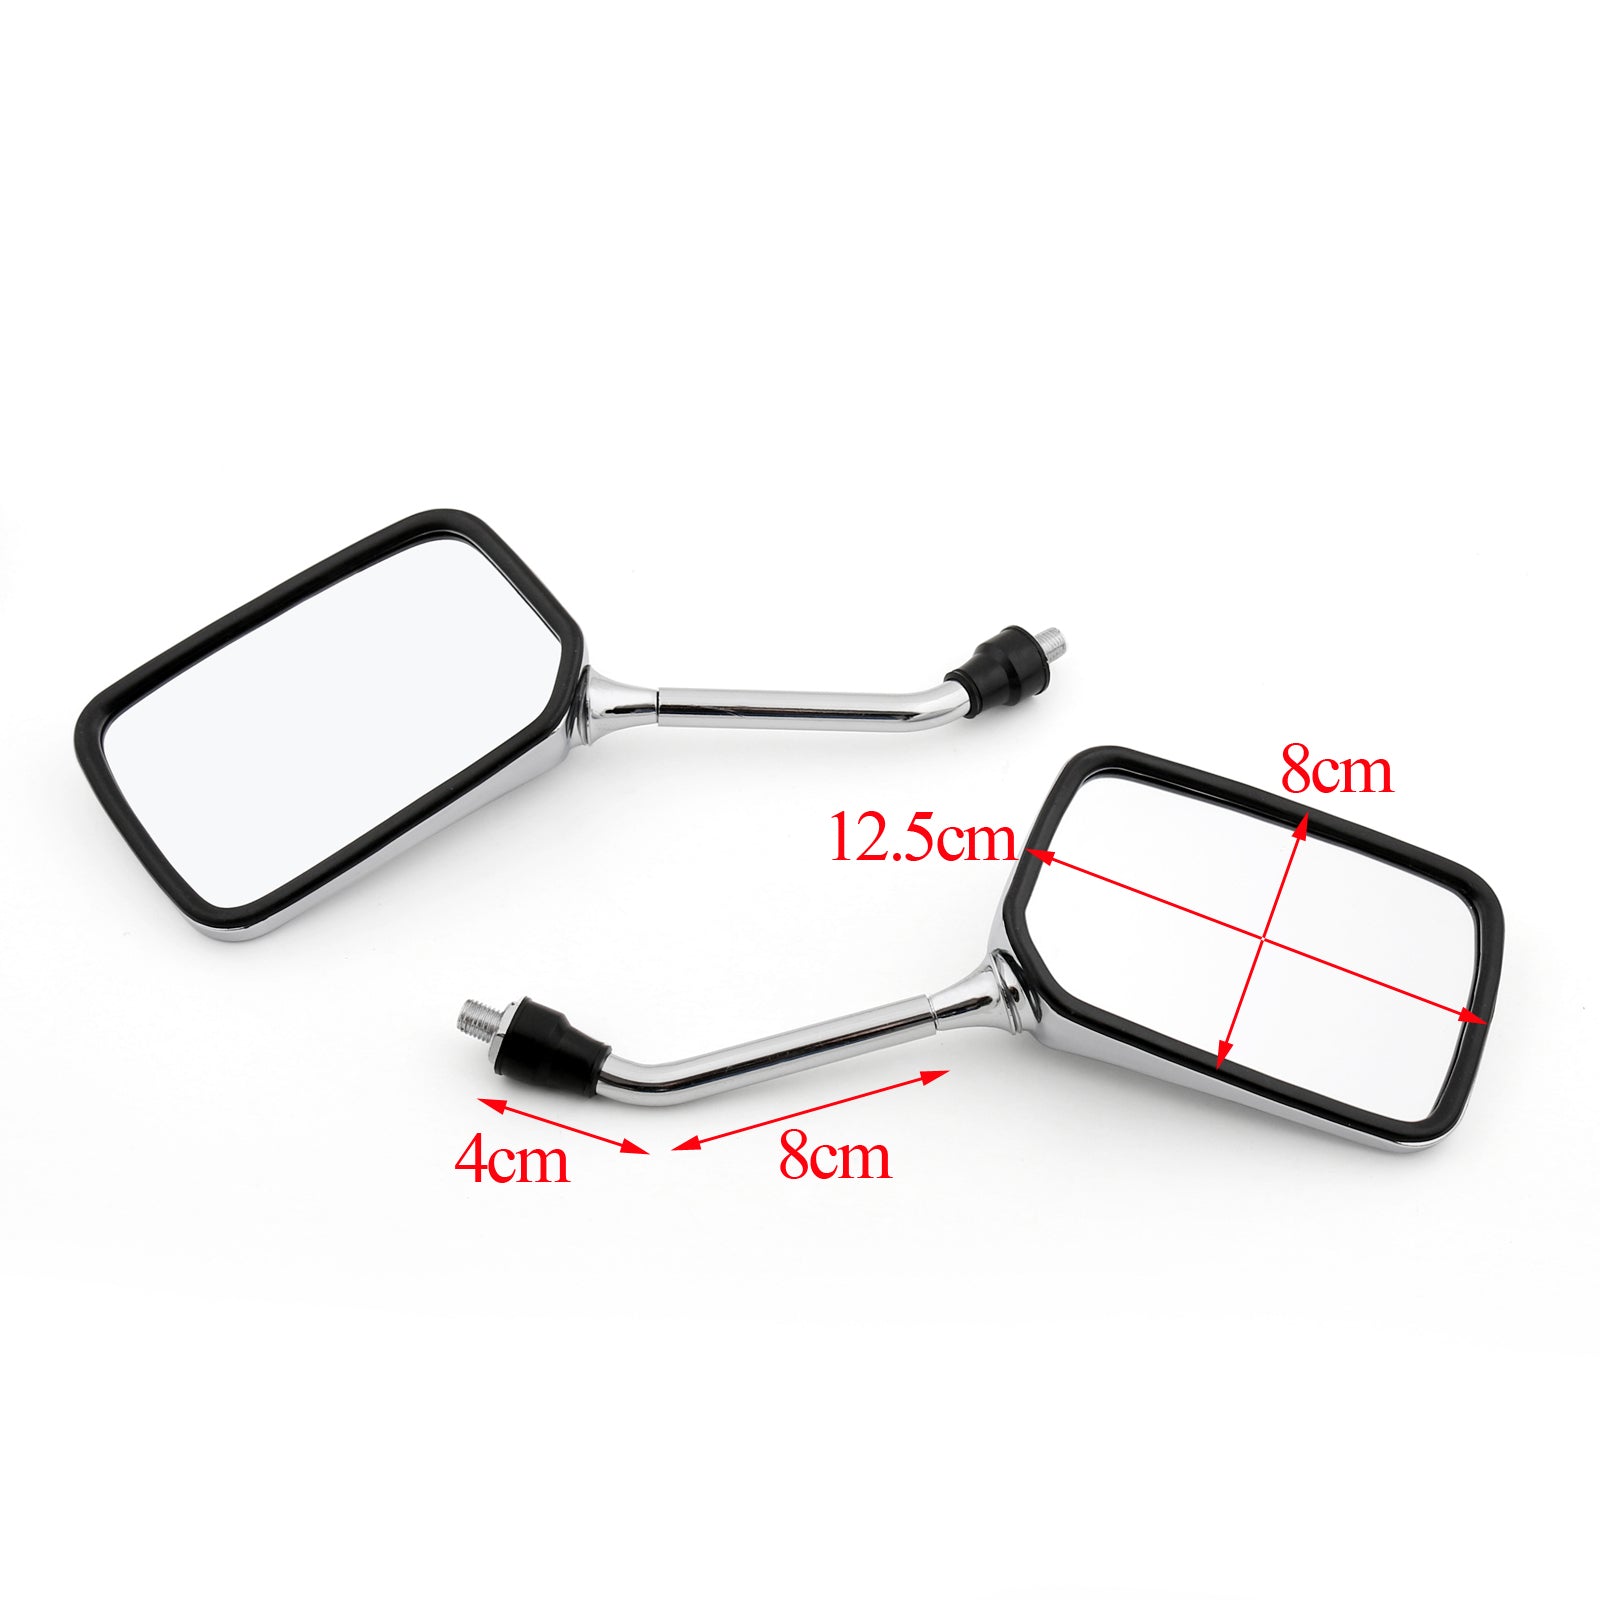 1 Pair Motorcycle Rearview Side Mirrors For Honda CB400 CB750 CB1000 CB1300 Generic